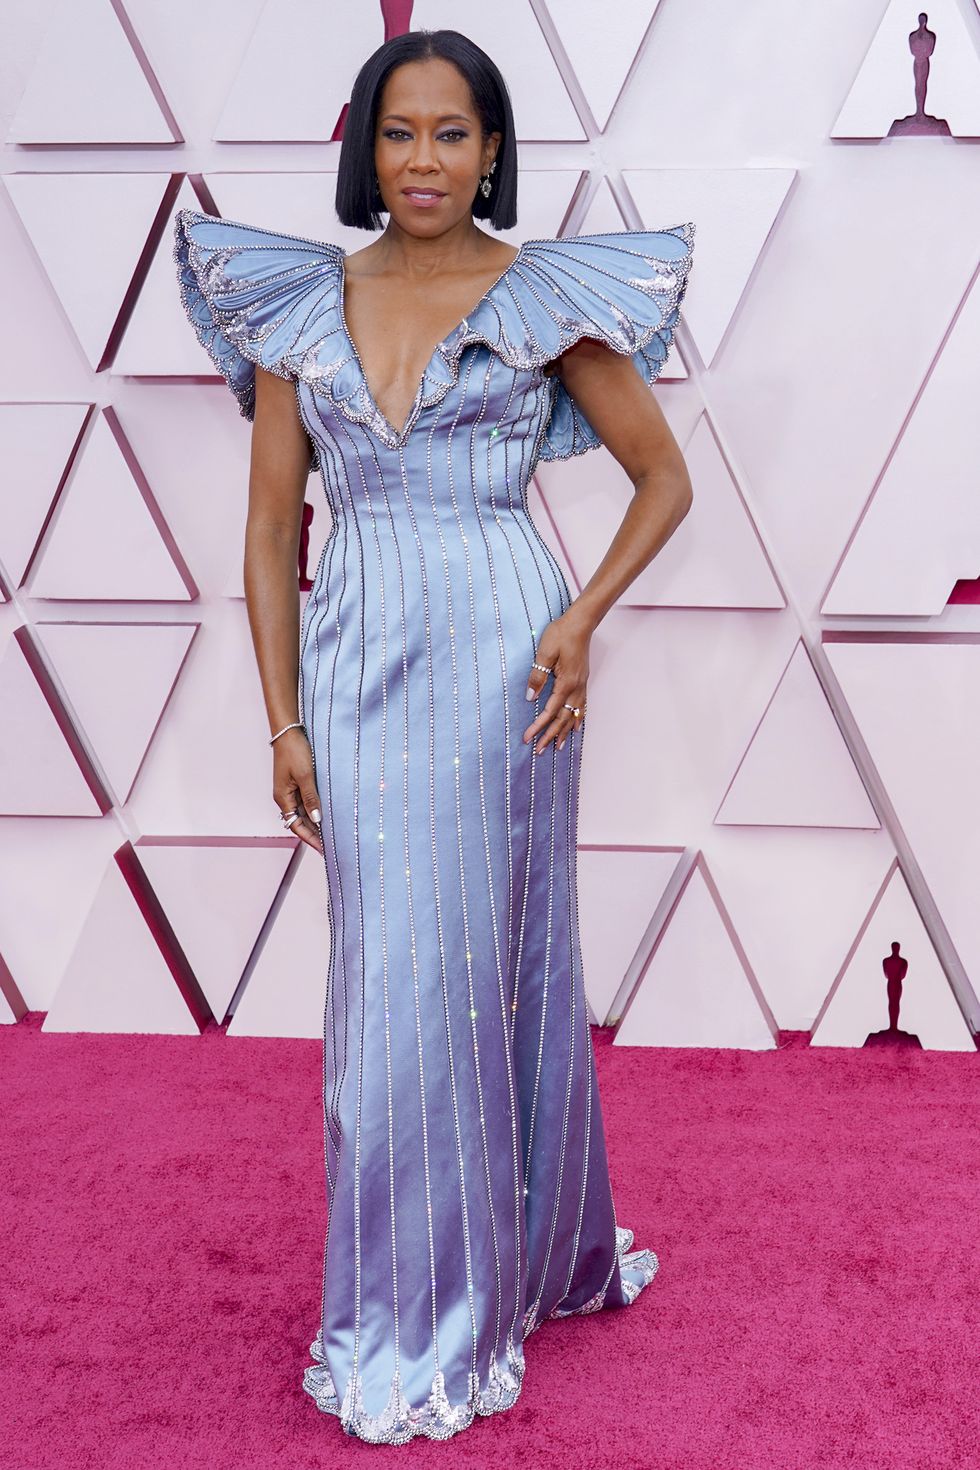 regina king in louis vuitton at the oscars in 2021